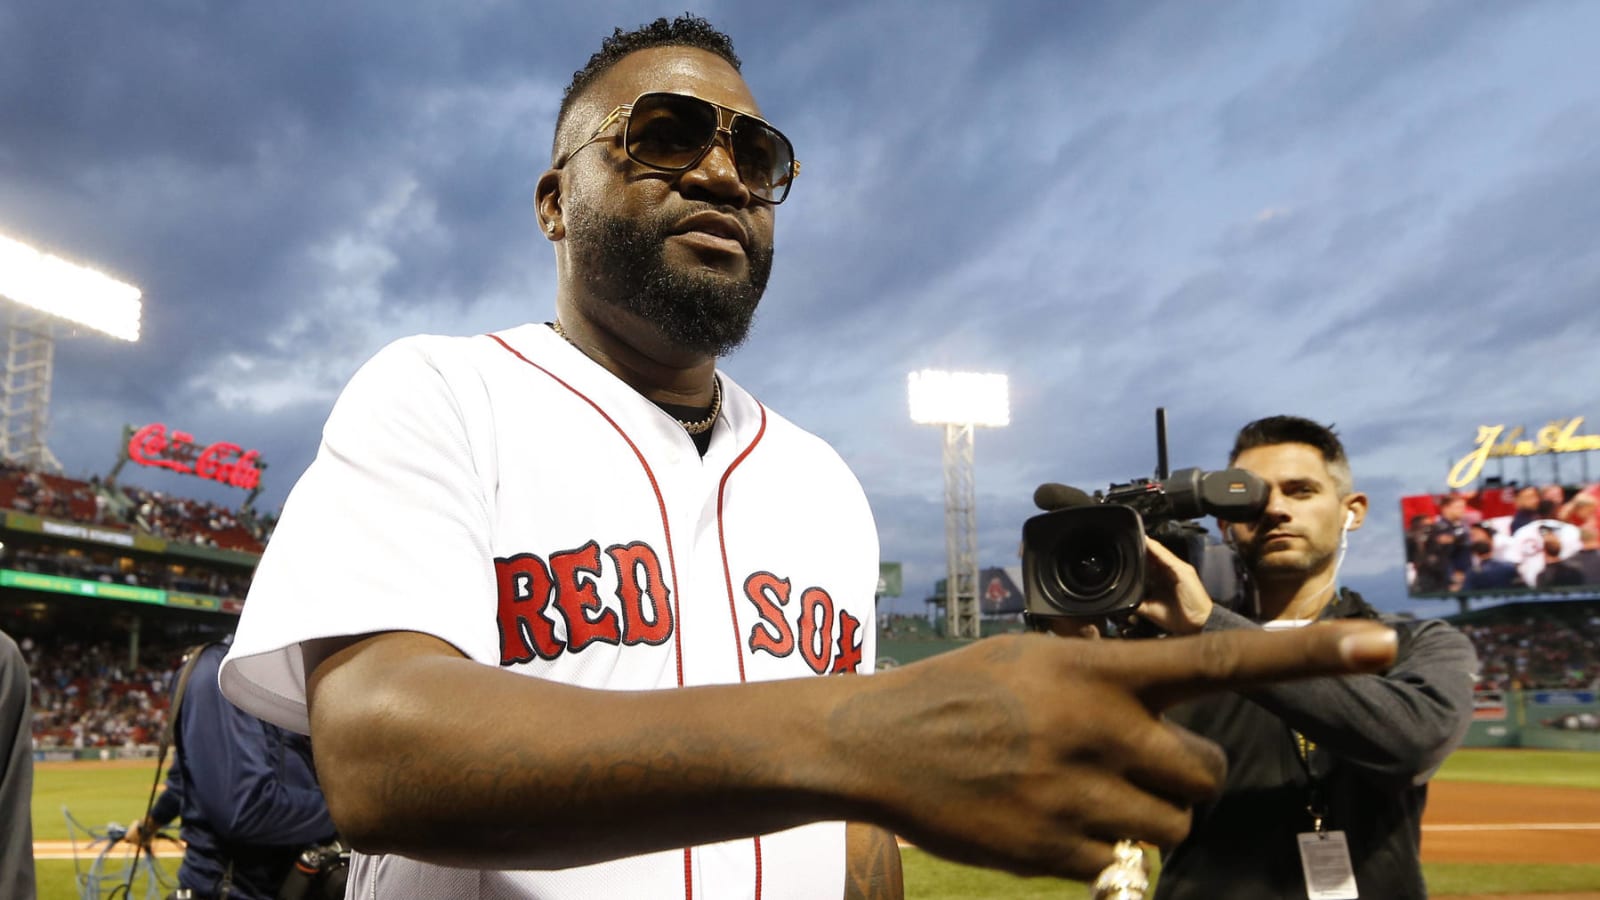 Restraining order issued against Red Sox legend David Ortiz in Dominican Republic 